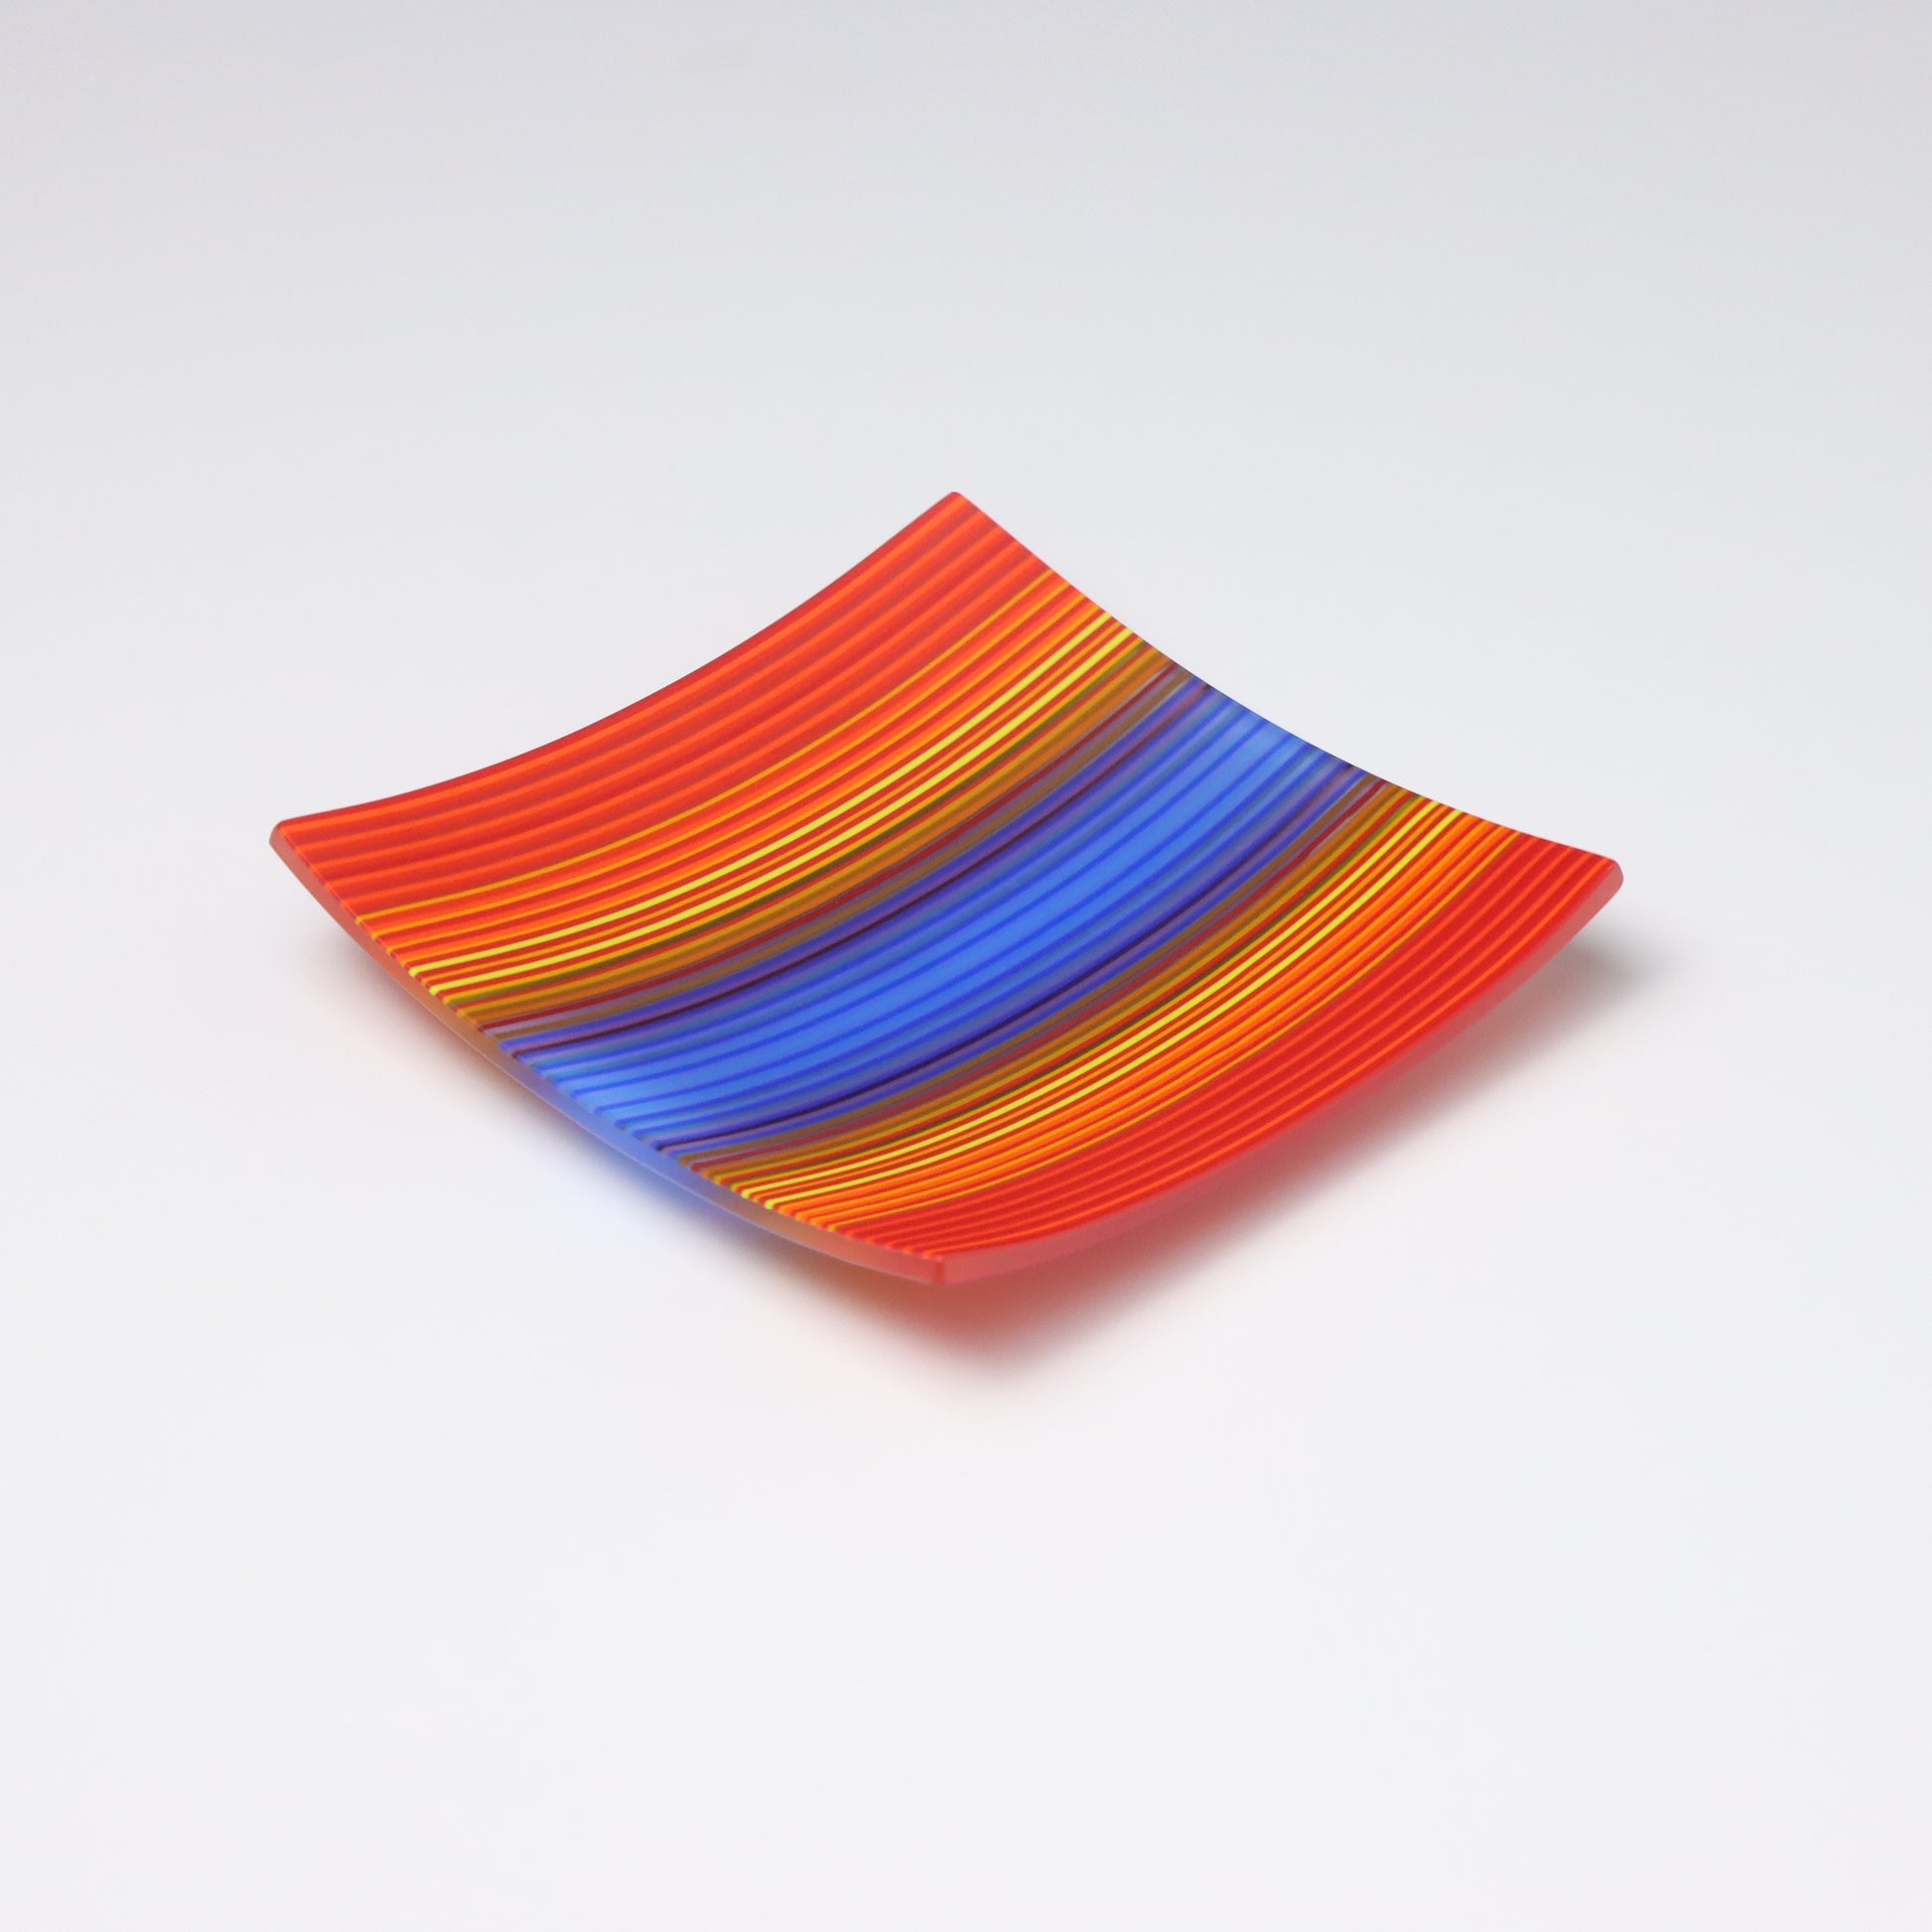 A colourful decorative glass plate - Small square shaped that curve up at the corners.  Design made up of coloured striped that start at red at the edges, transition to oranges purples and blues inthe center.